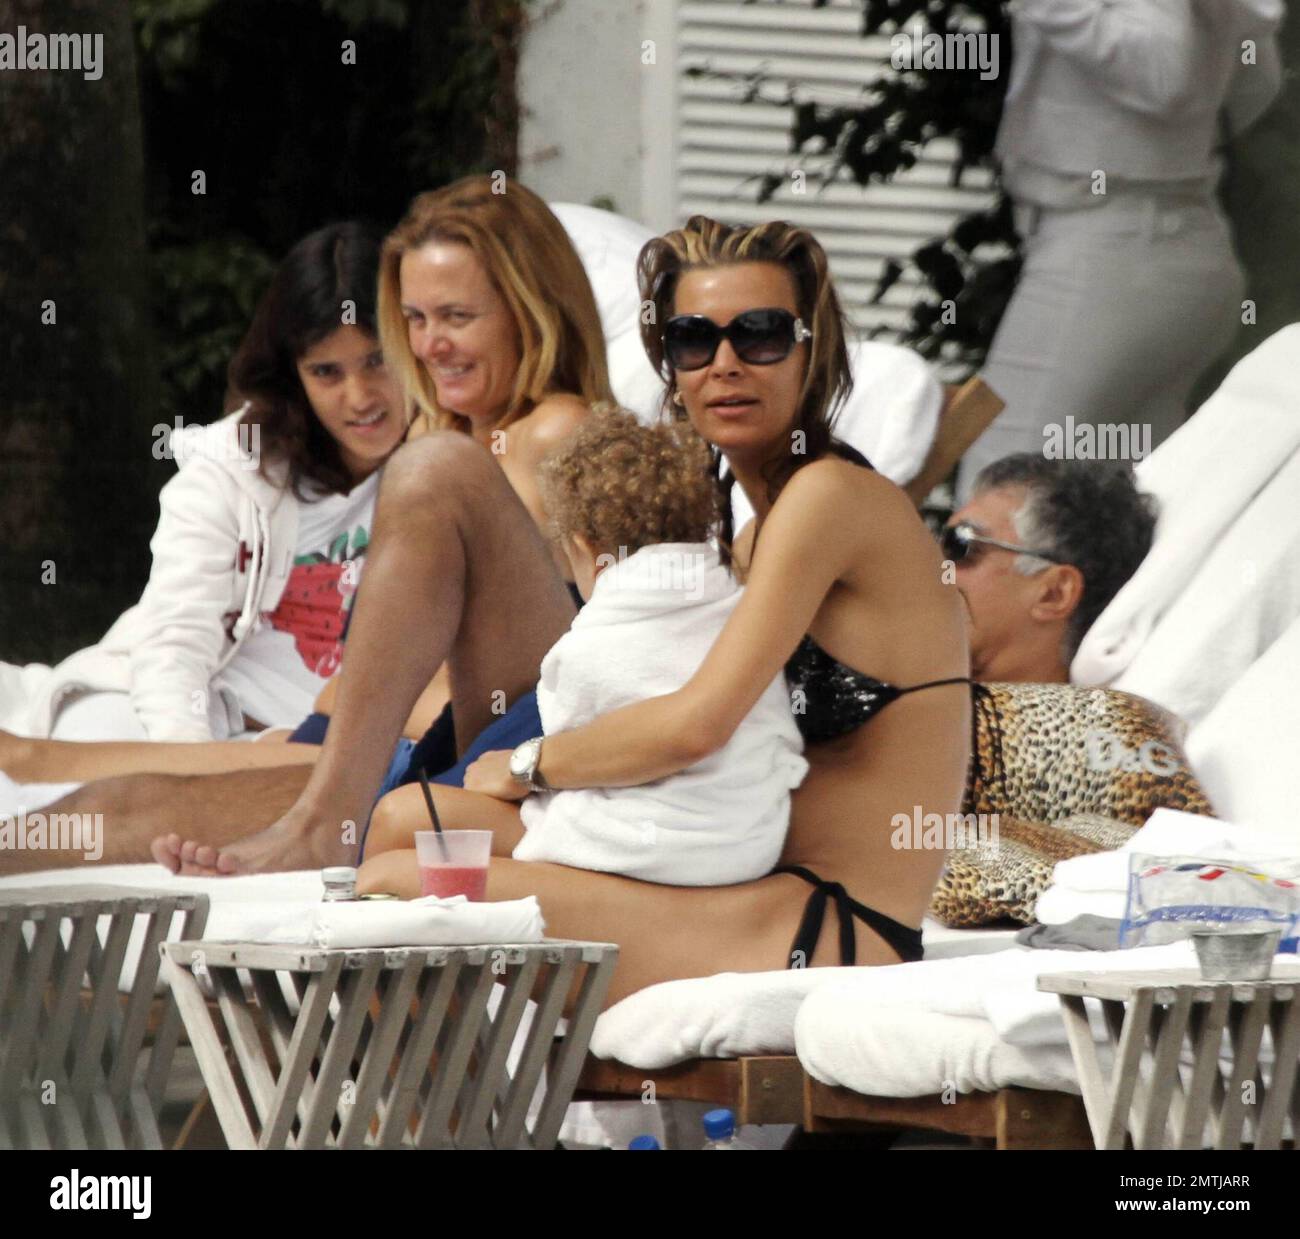 Tattooed Beauty Queen, Sarah Gerth, wife of German footballer Jermaine Jones, relaxes poolside at her luxury hotel in a star string bikini. The blonde beauty also got a cuddle from one of her twins and lounged with her own animal print designer Dolce & Gabbana pillows. Miami Beach, FL. 12/29/10. Stock Photo